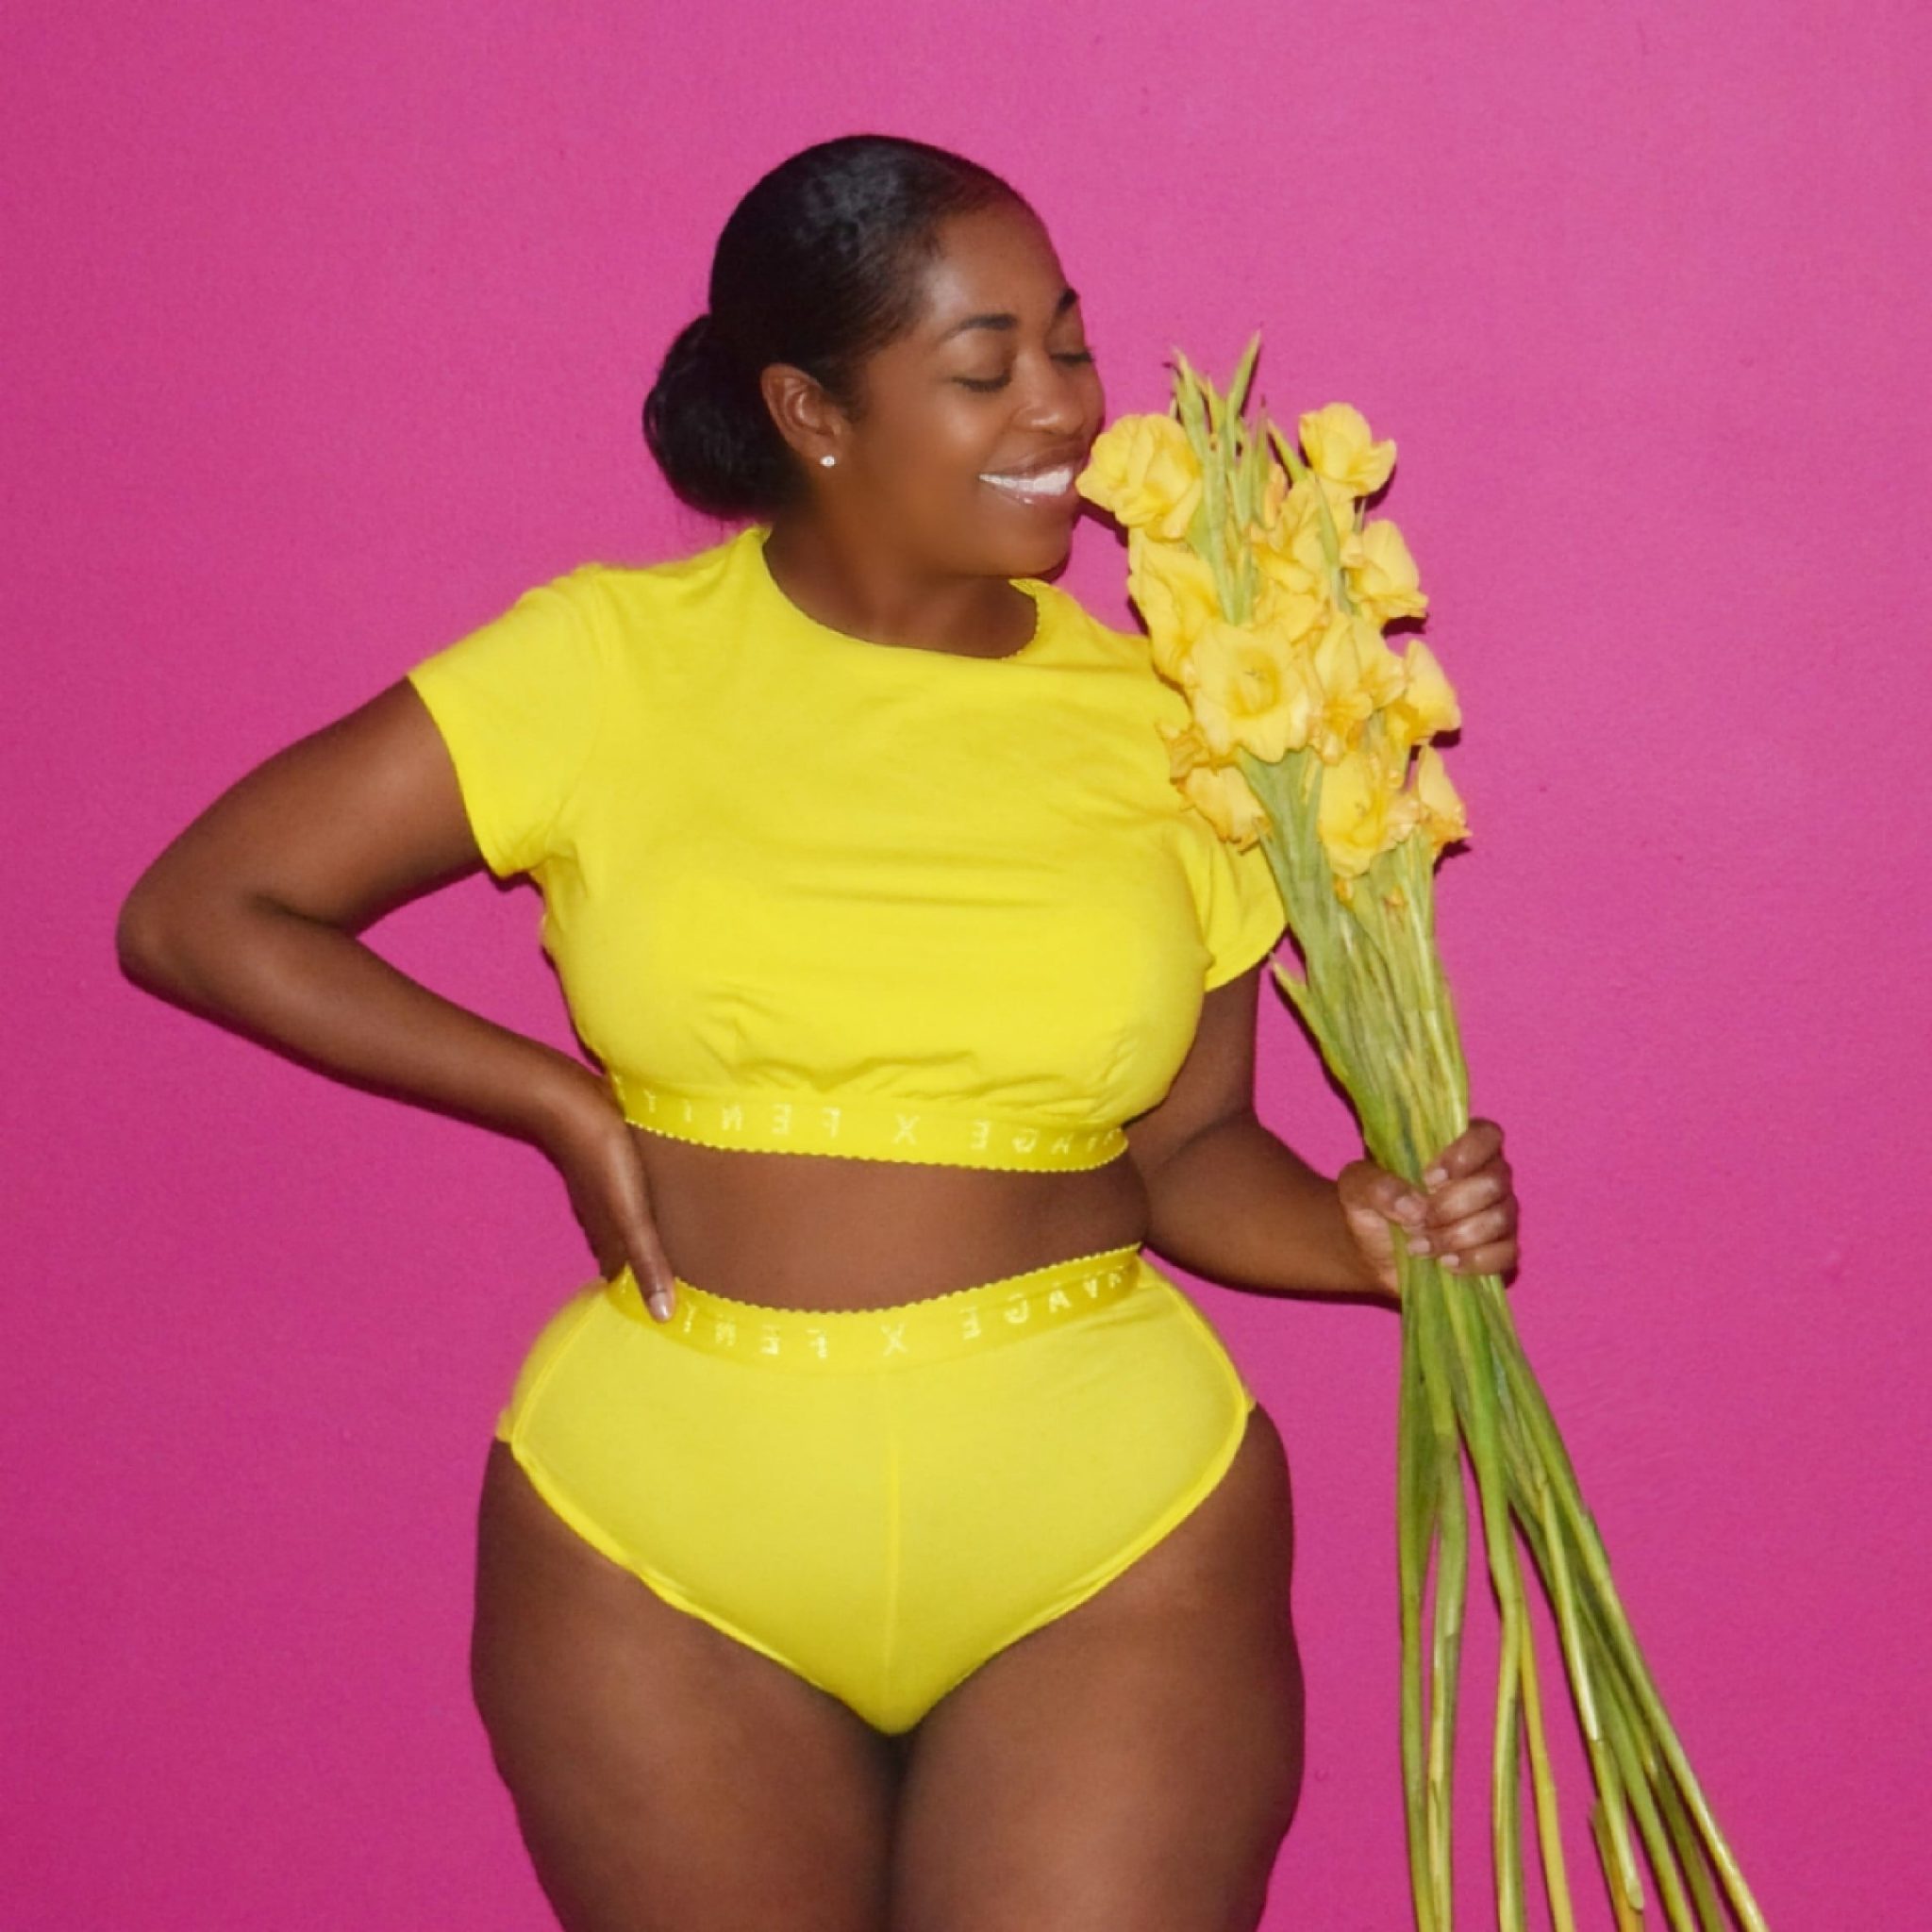 8 Plus-Sized Fashion Influencers To Follow On Instagram For